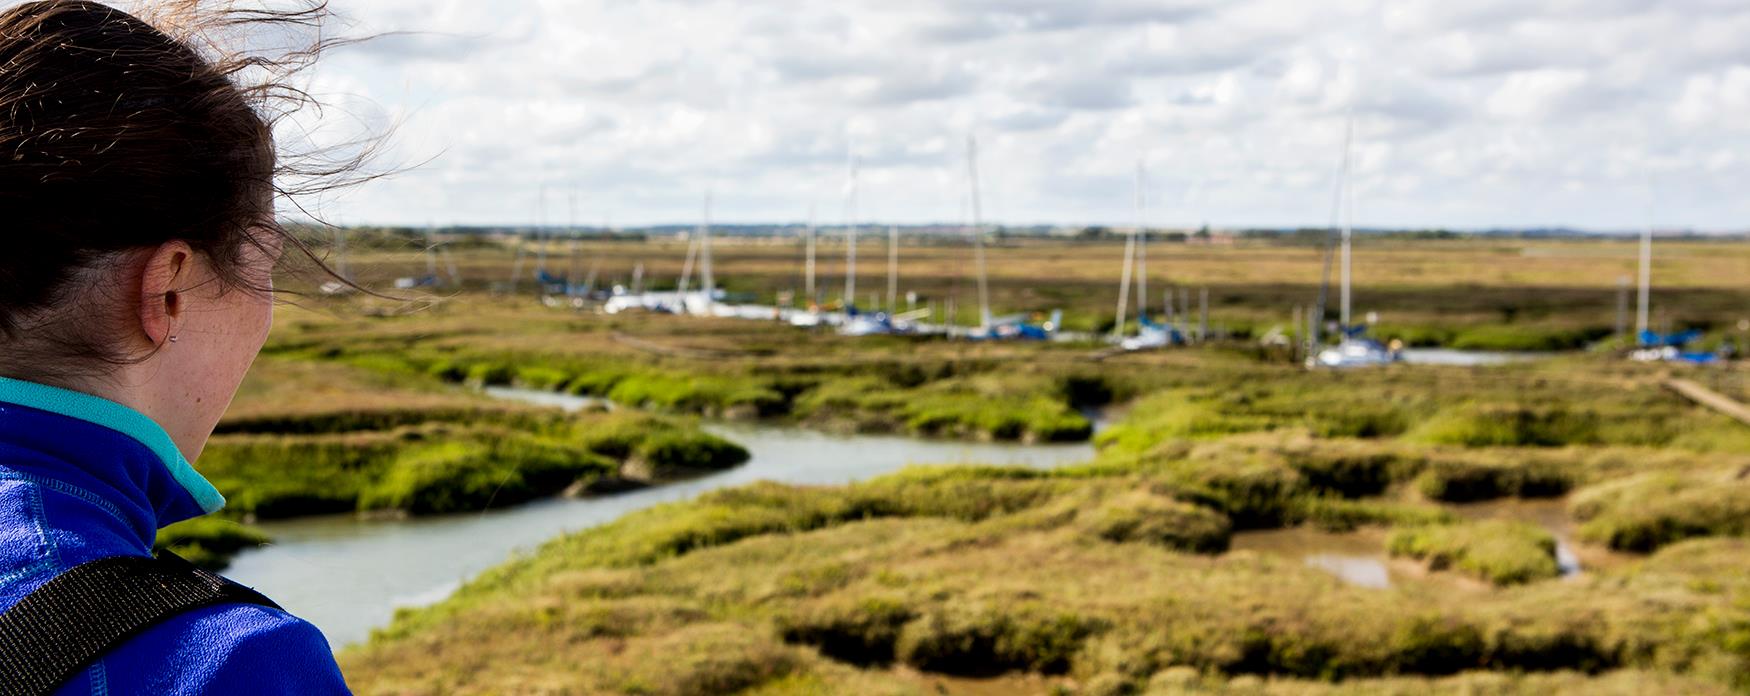 A view of the saltmarsh and boats in Tollesbury